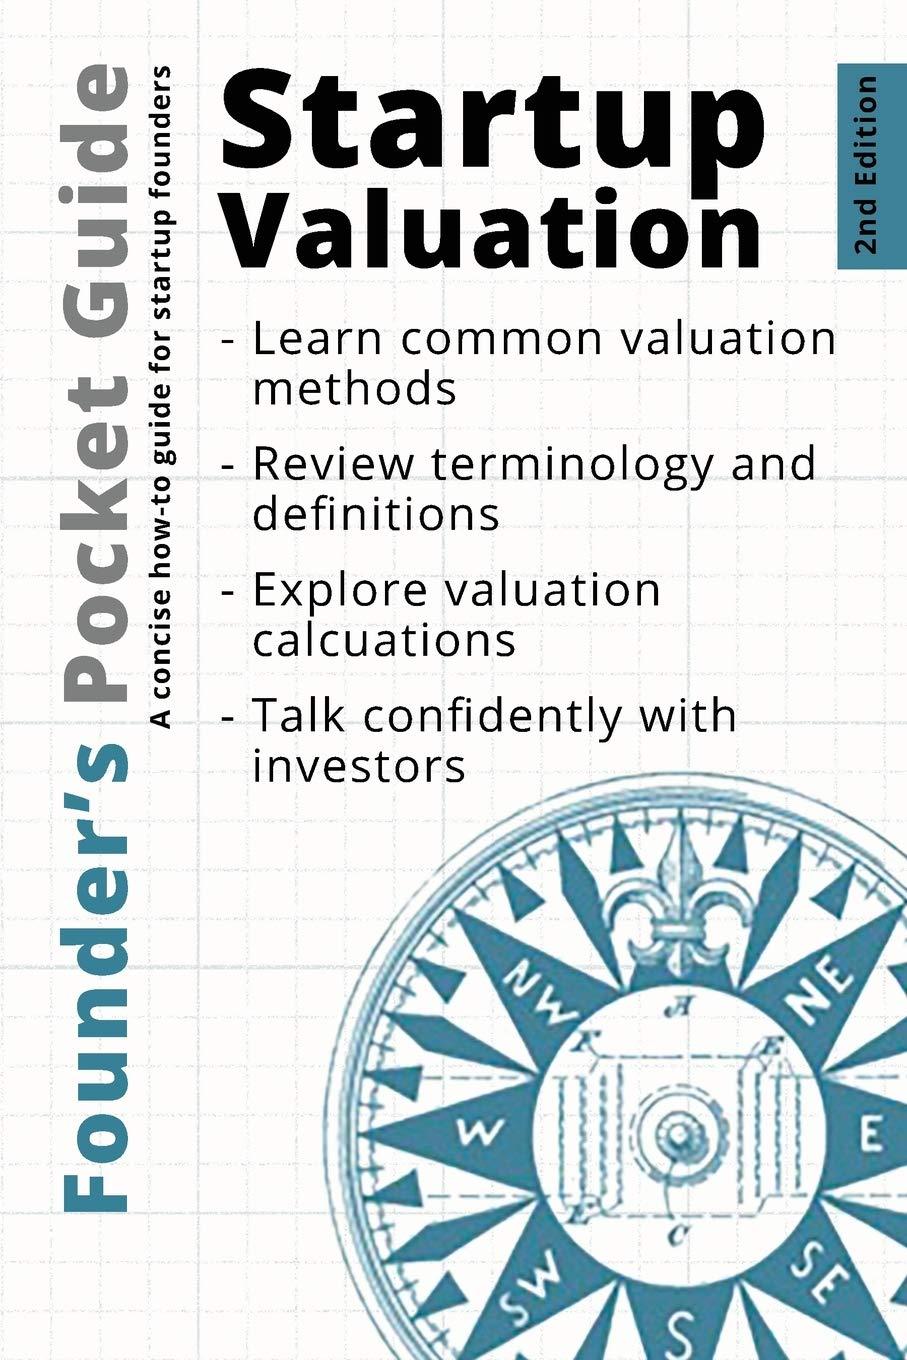 founders pocket guide startup valuation 2nd edition stephen r. poland 1938162048, 978-1938162046